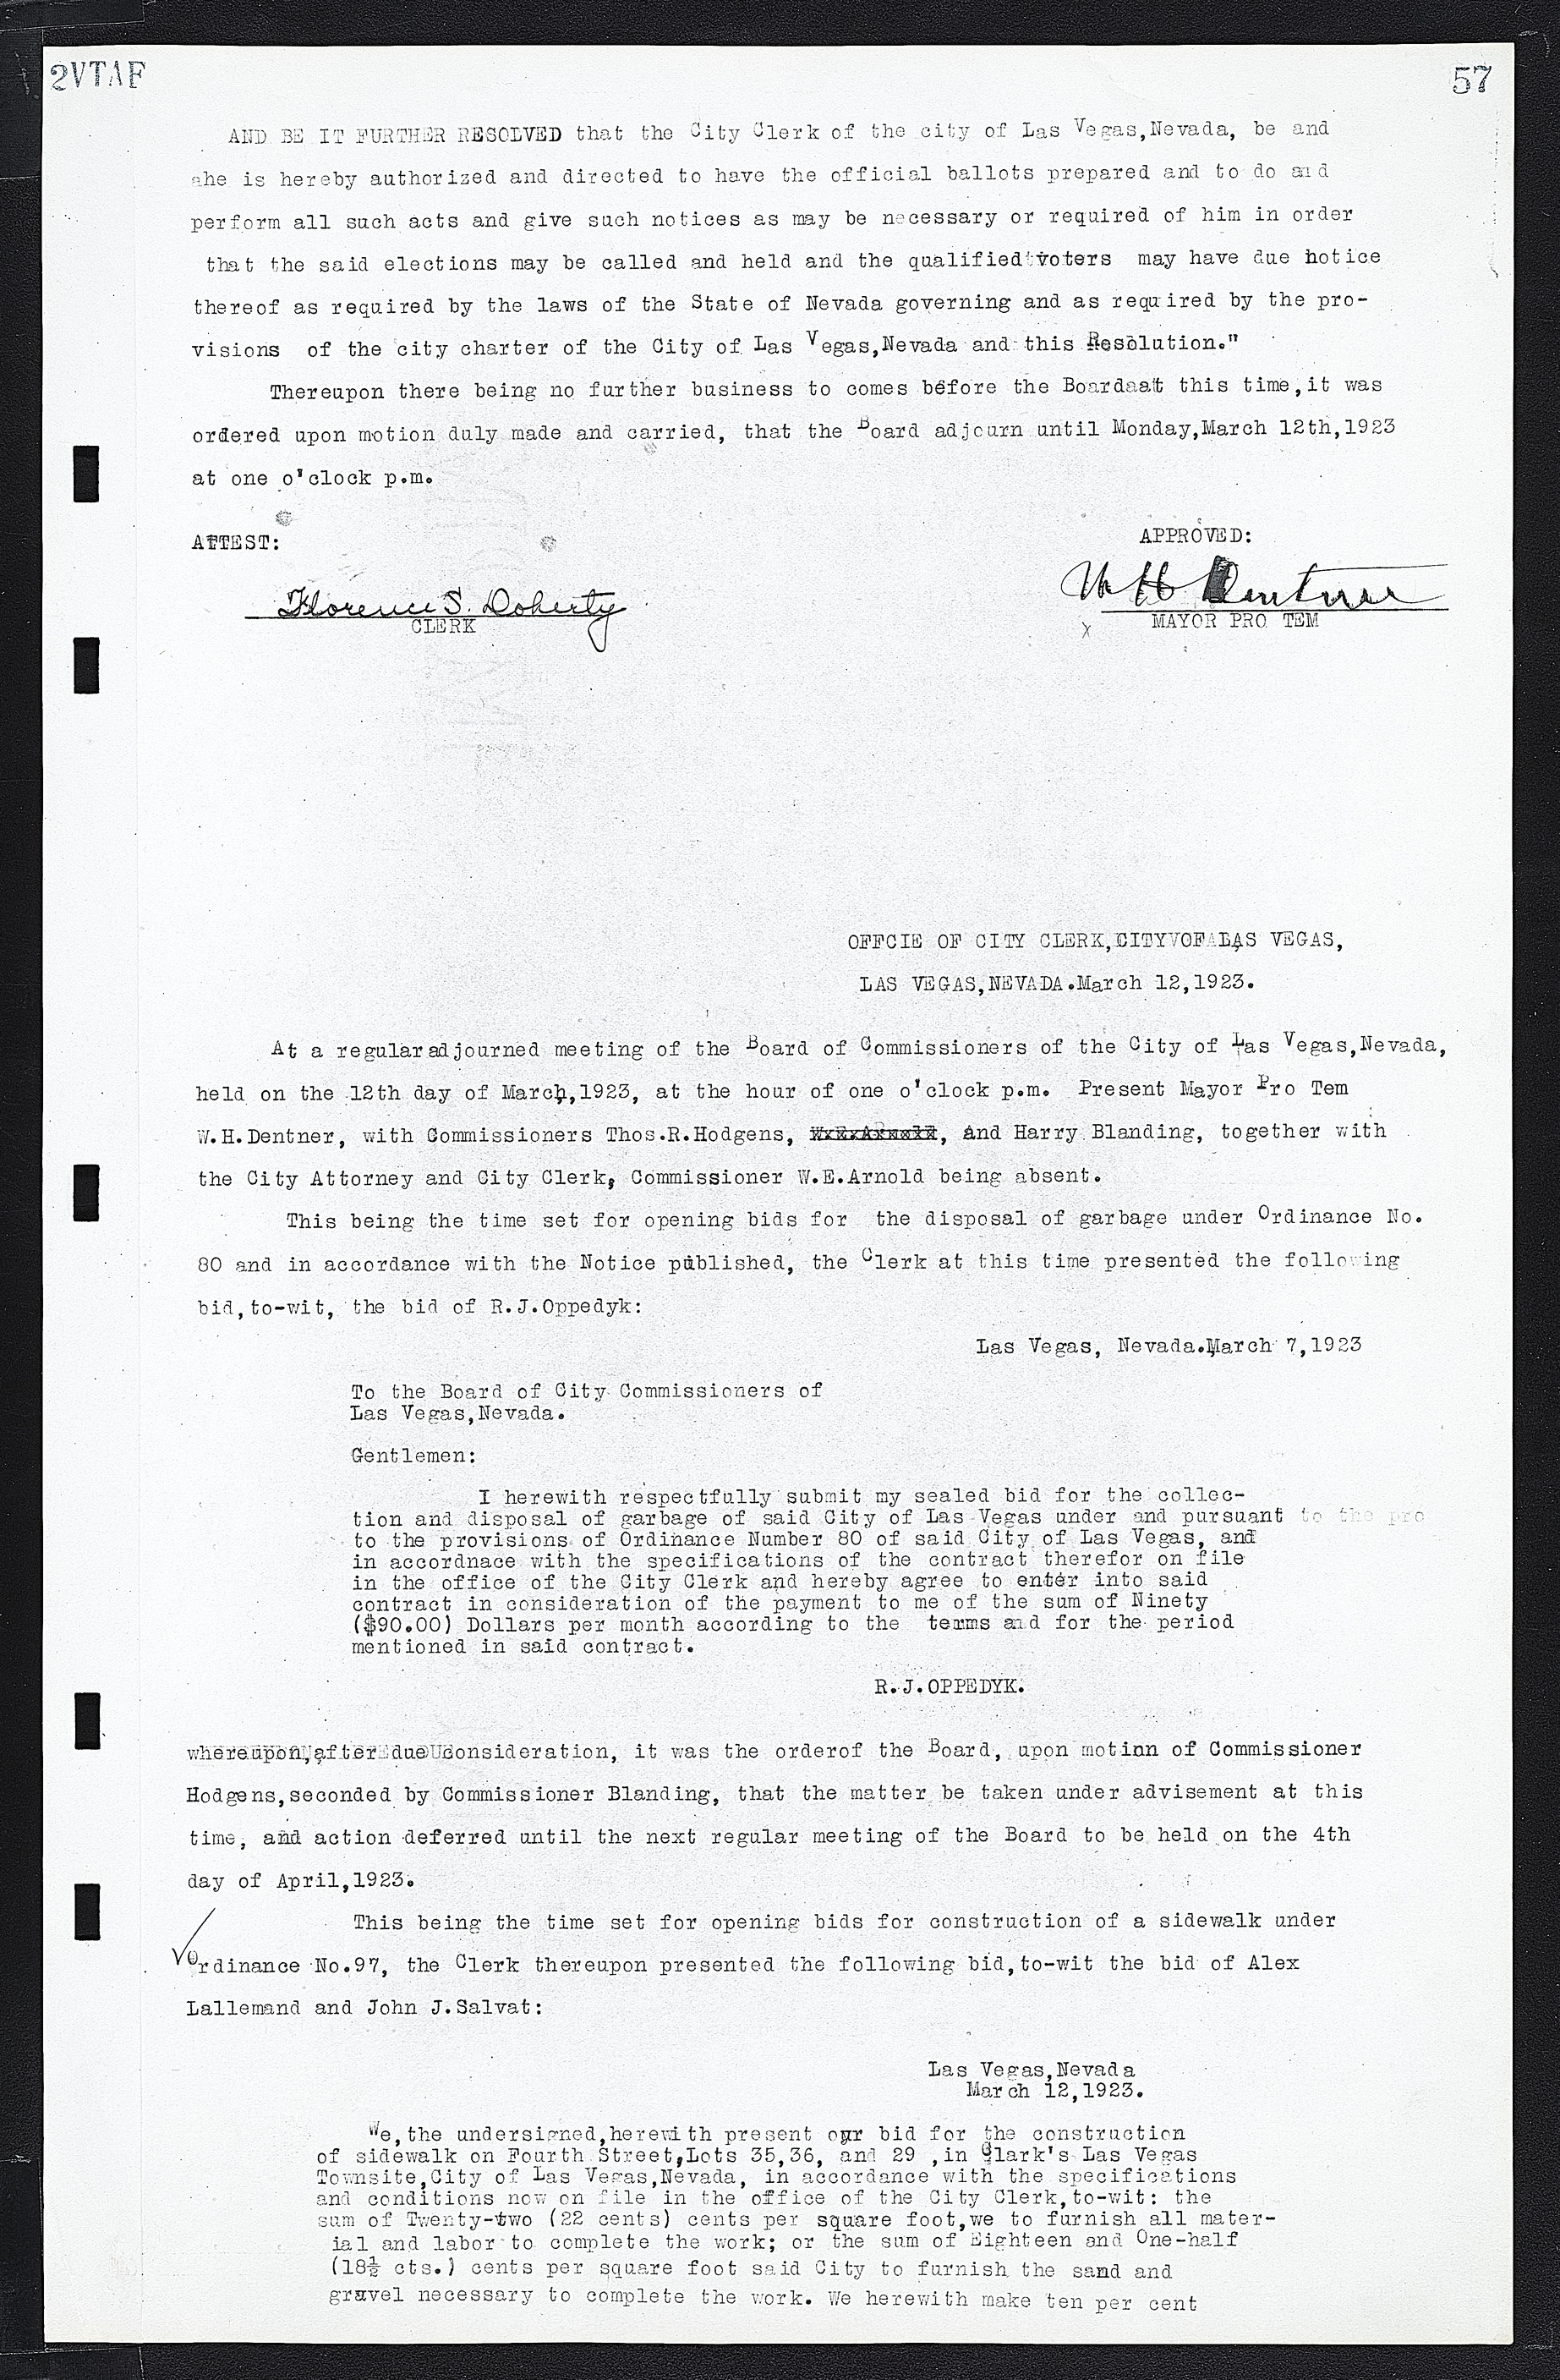 Las Vegas City Commission Minutes, March 1, 1922 to May 10, 1929, lvc000002-64